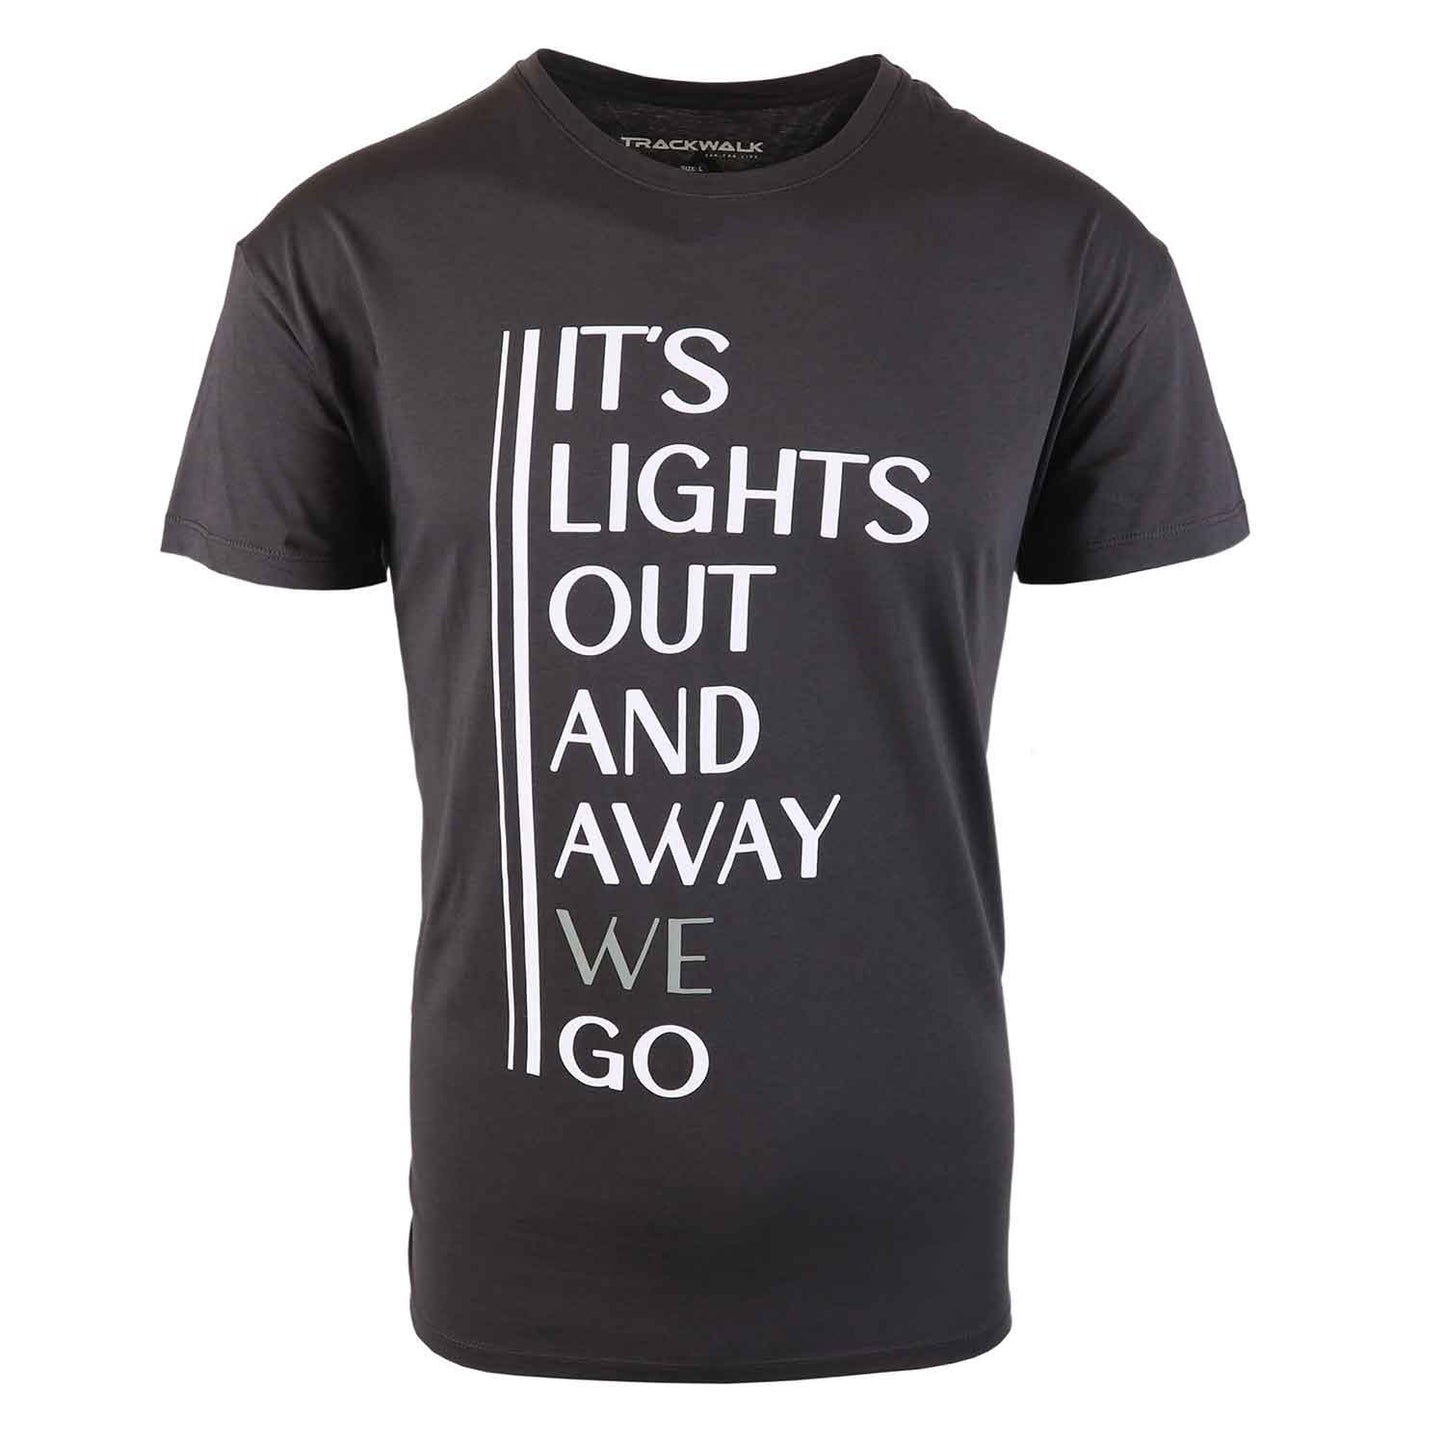 Heren T-shirt ‘It’s lights out and away we go’